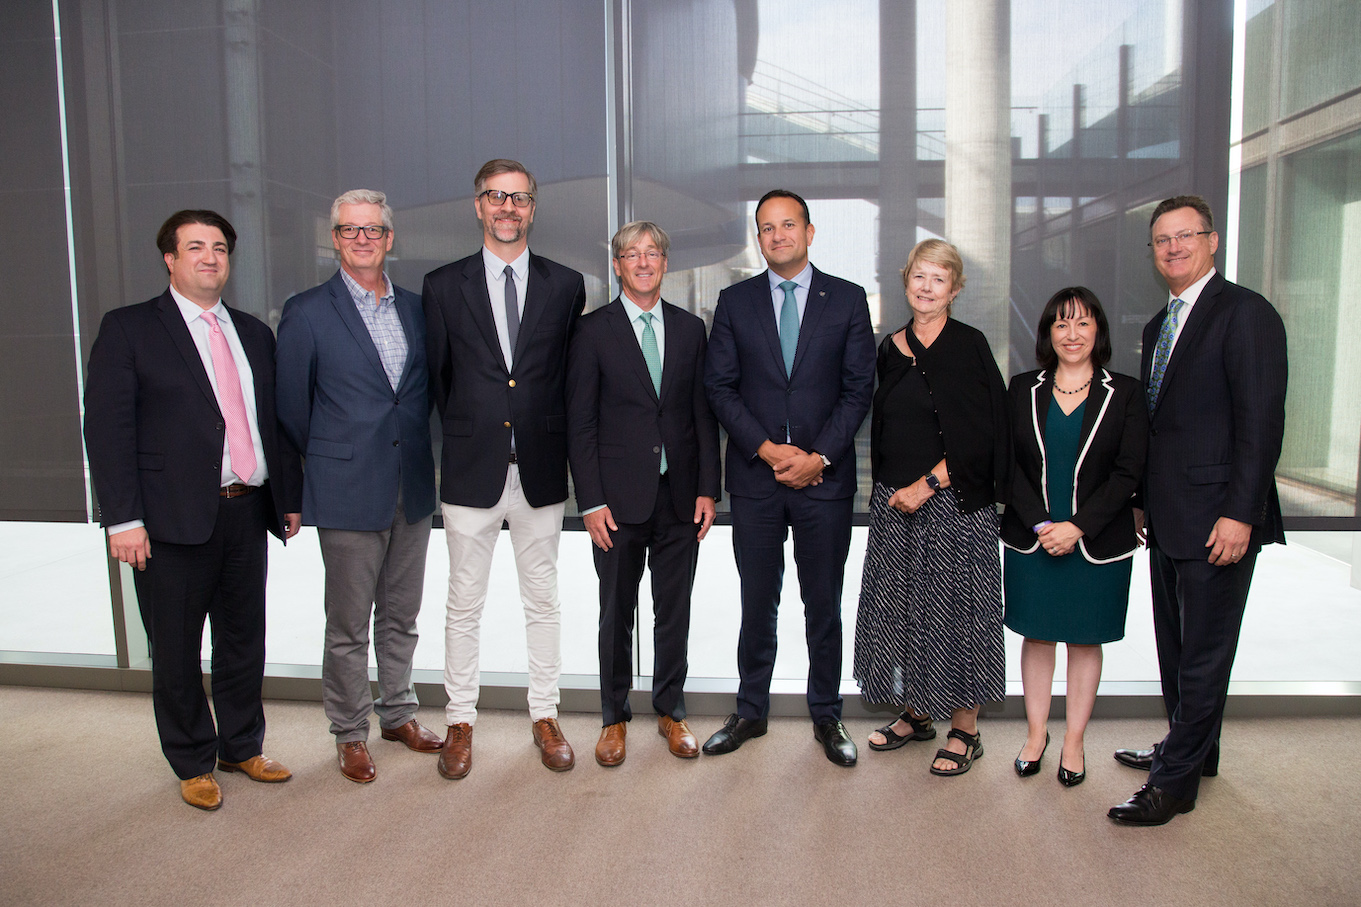 The Irish Prime Minister Leo Varadkar poses with his entourage and LMU faculty